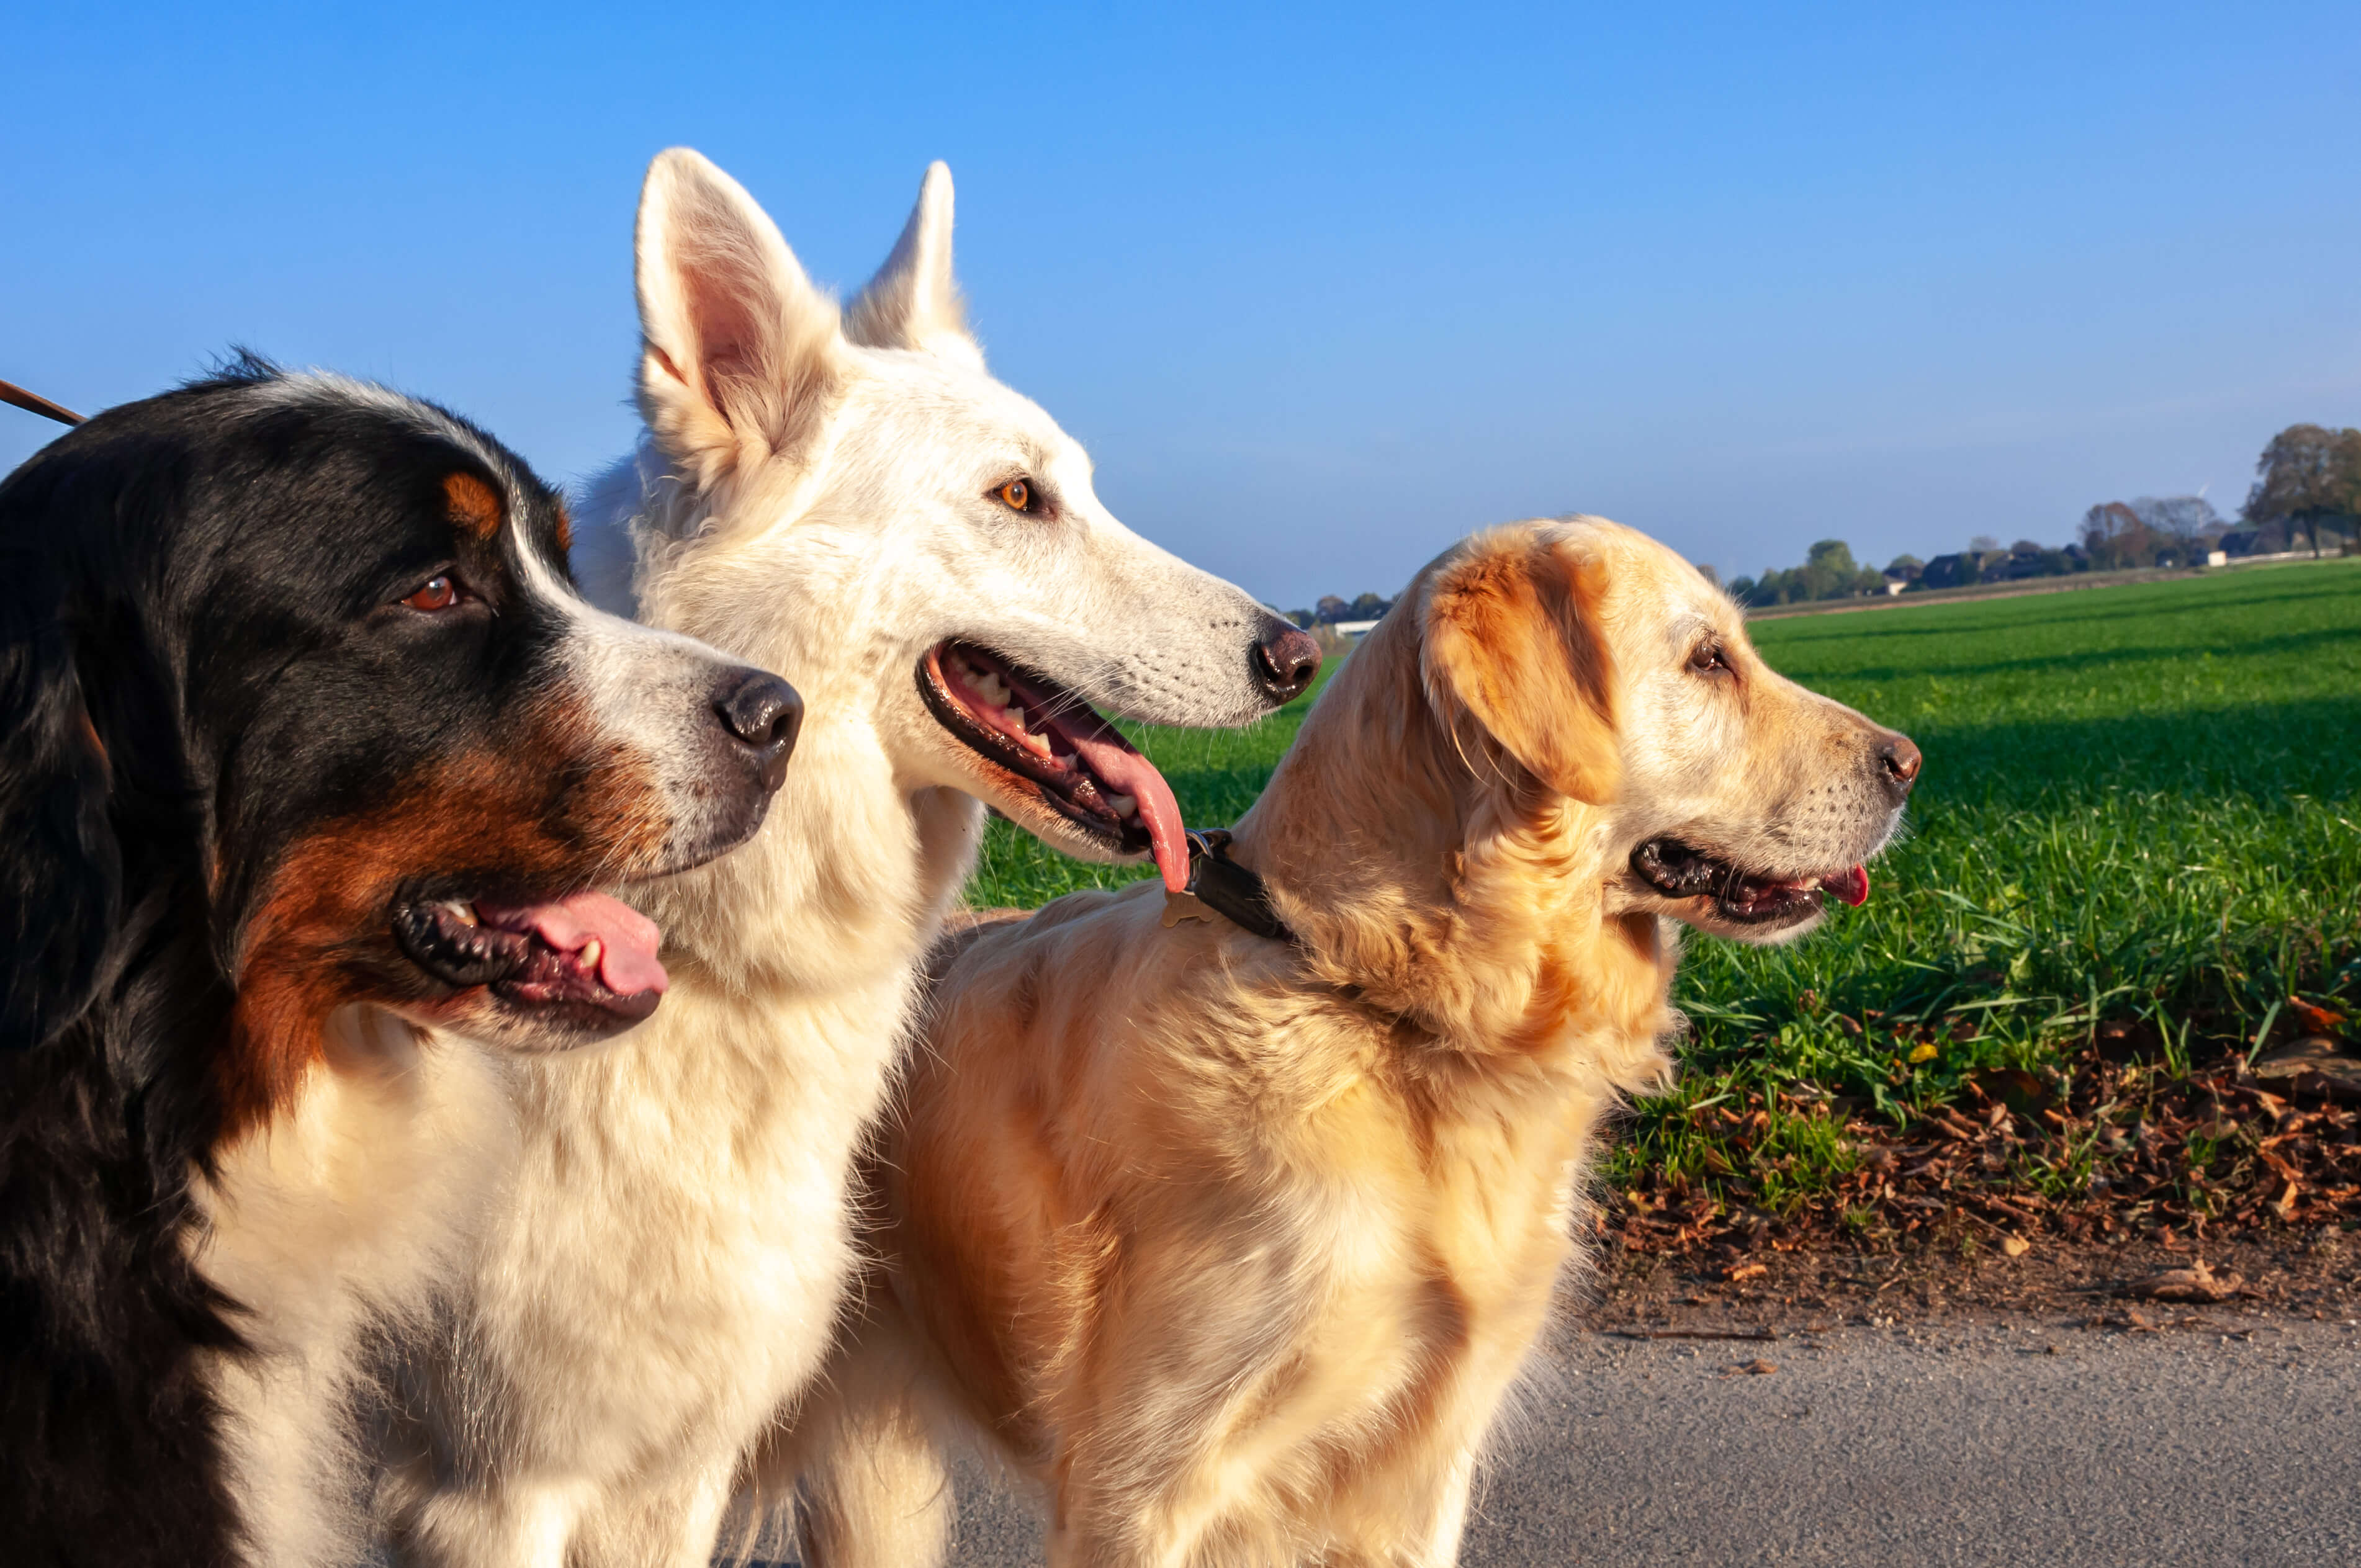 Biologically Appropriate Diet for Dogs: What is it and what are the benefits?